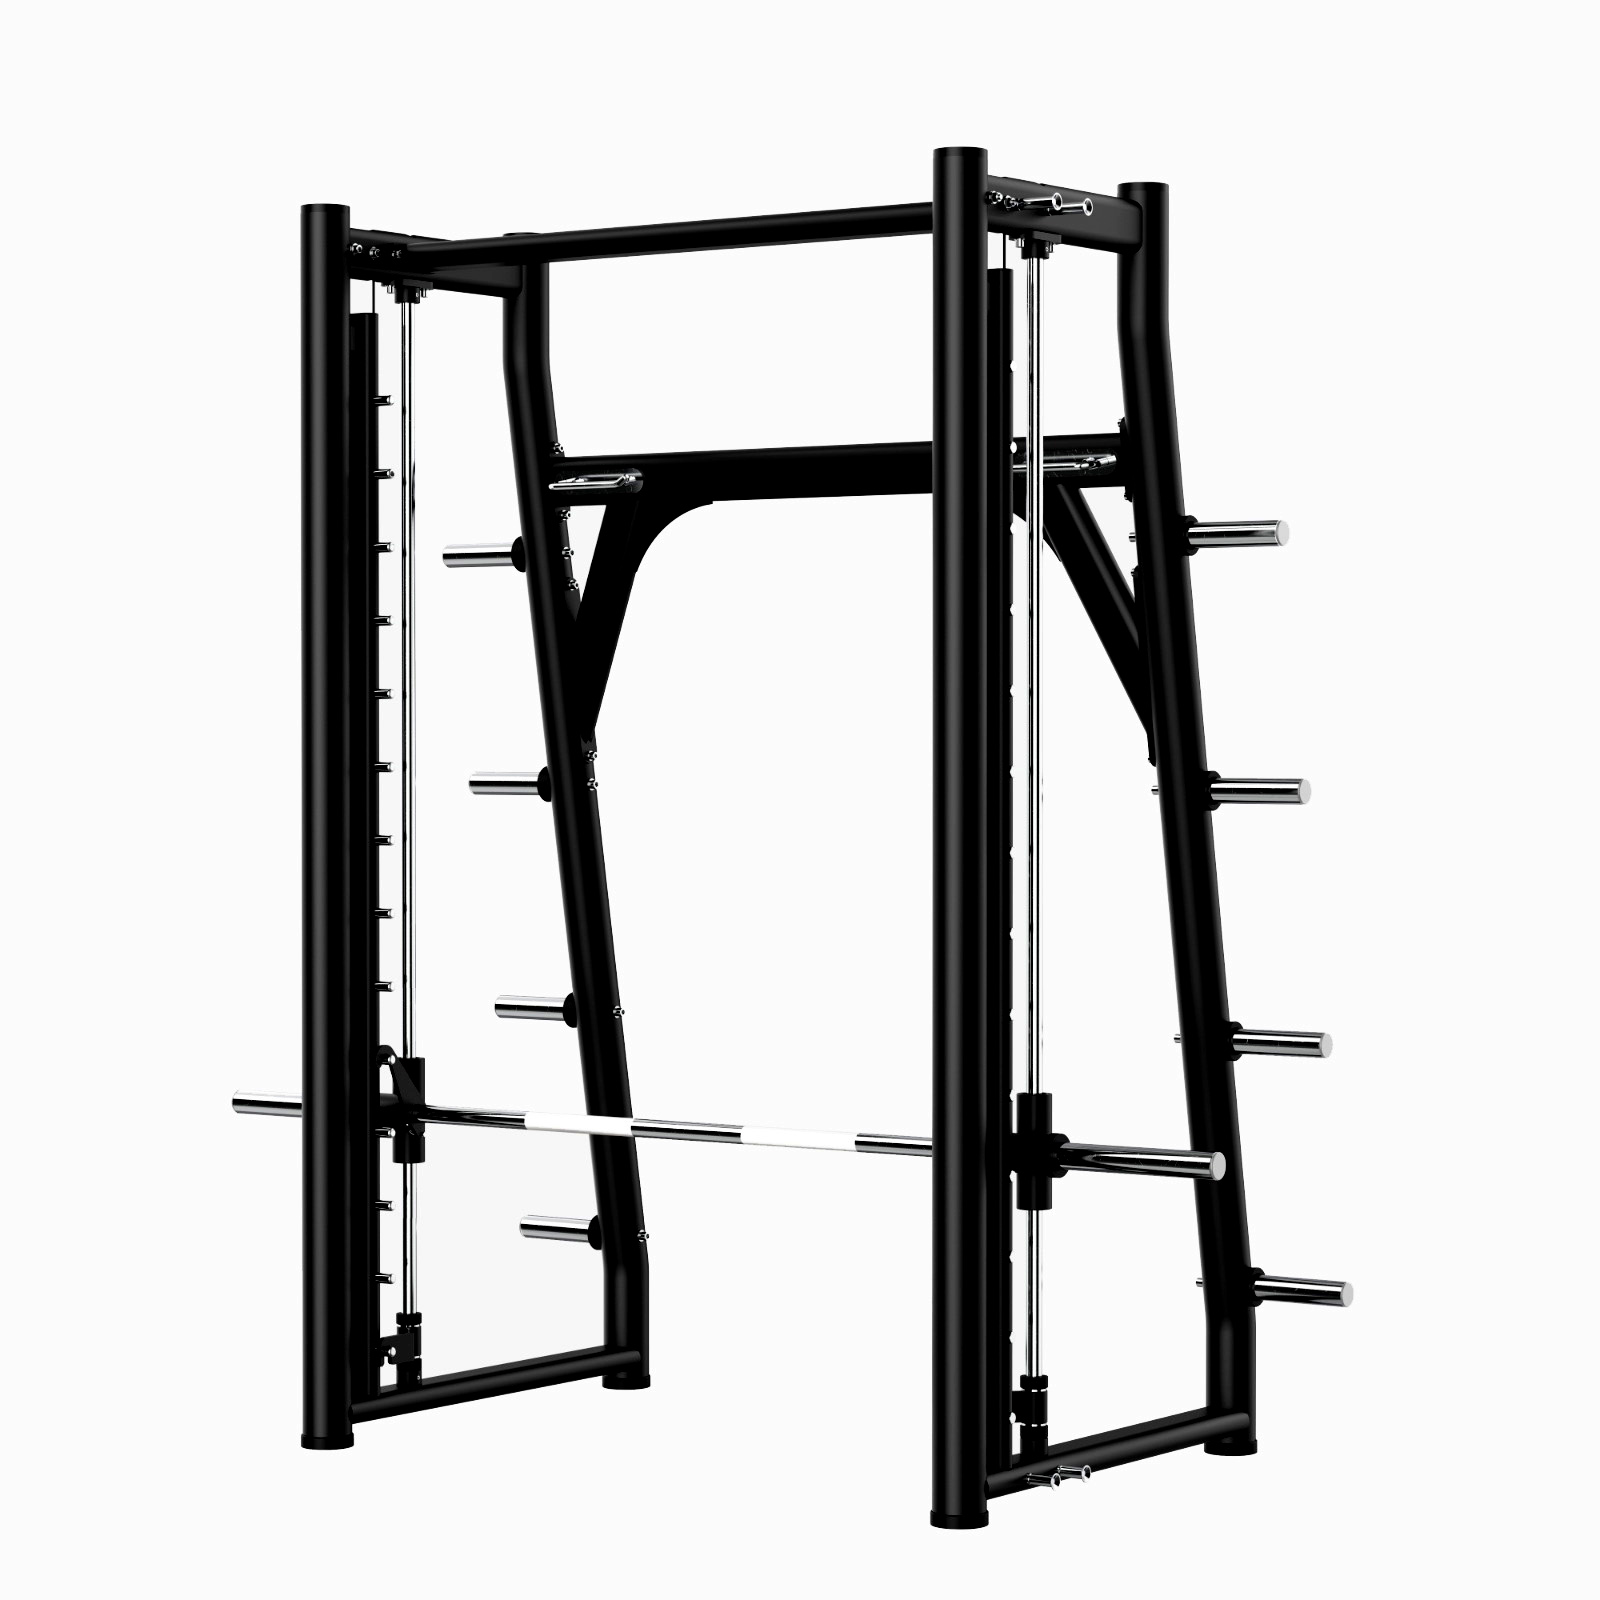 Insight Fitness RE Series Smith Machine RE6001